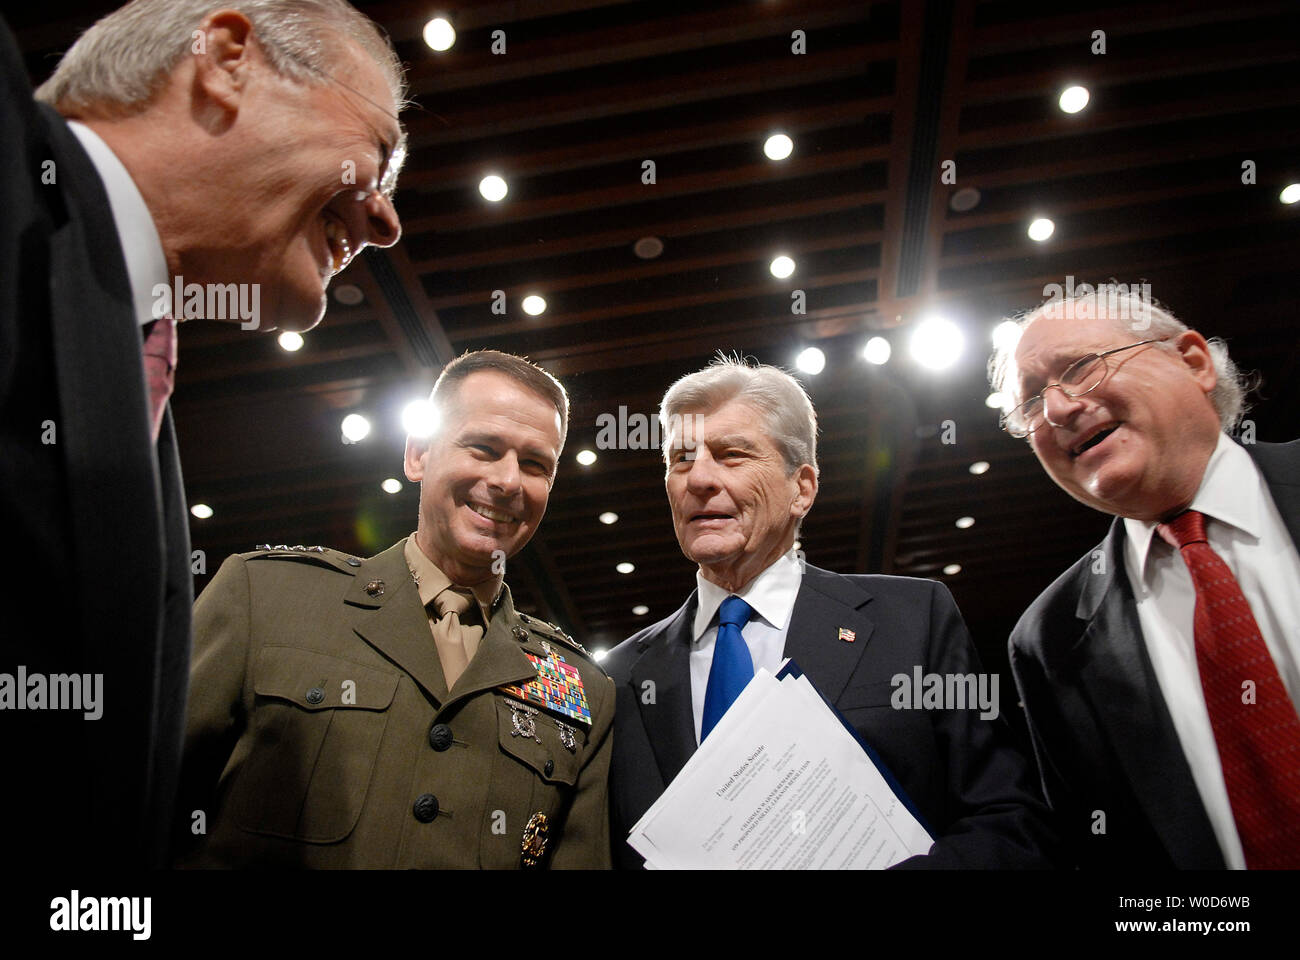 From left to right, Secretary of Defense Donald Rumsfeld, Chairman of the Joint Chiefs of Staff Gen. Peter Pace, Sen John Warner (R-VA) and Sen. Carl Levin (D - MI) talk prior to a Senate Armed Services Committee hearing on Iraq, Afganistran and the global war on terror, in Washington on August 3, 2006. (UPI Photo/Kevin Dietsch) Stock Photo